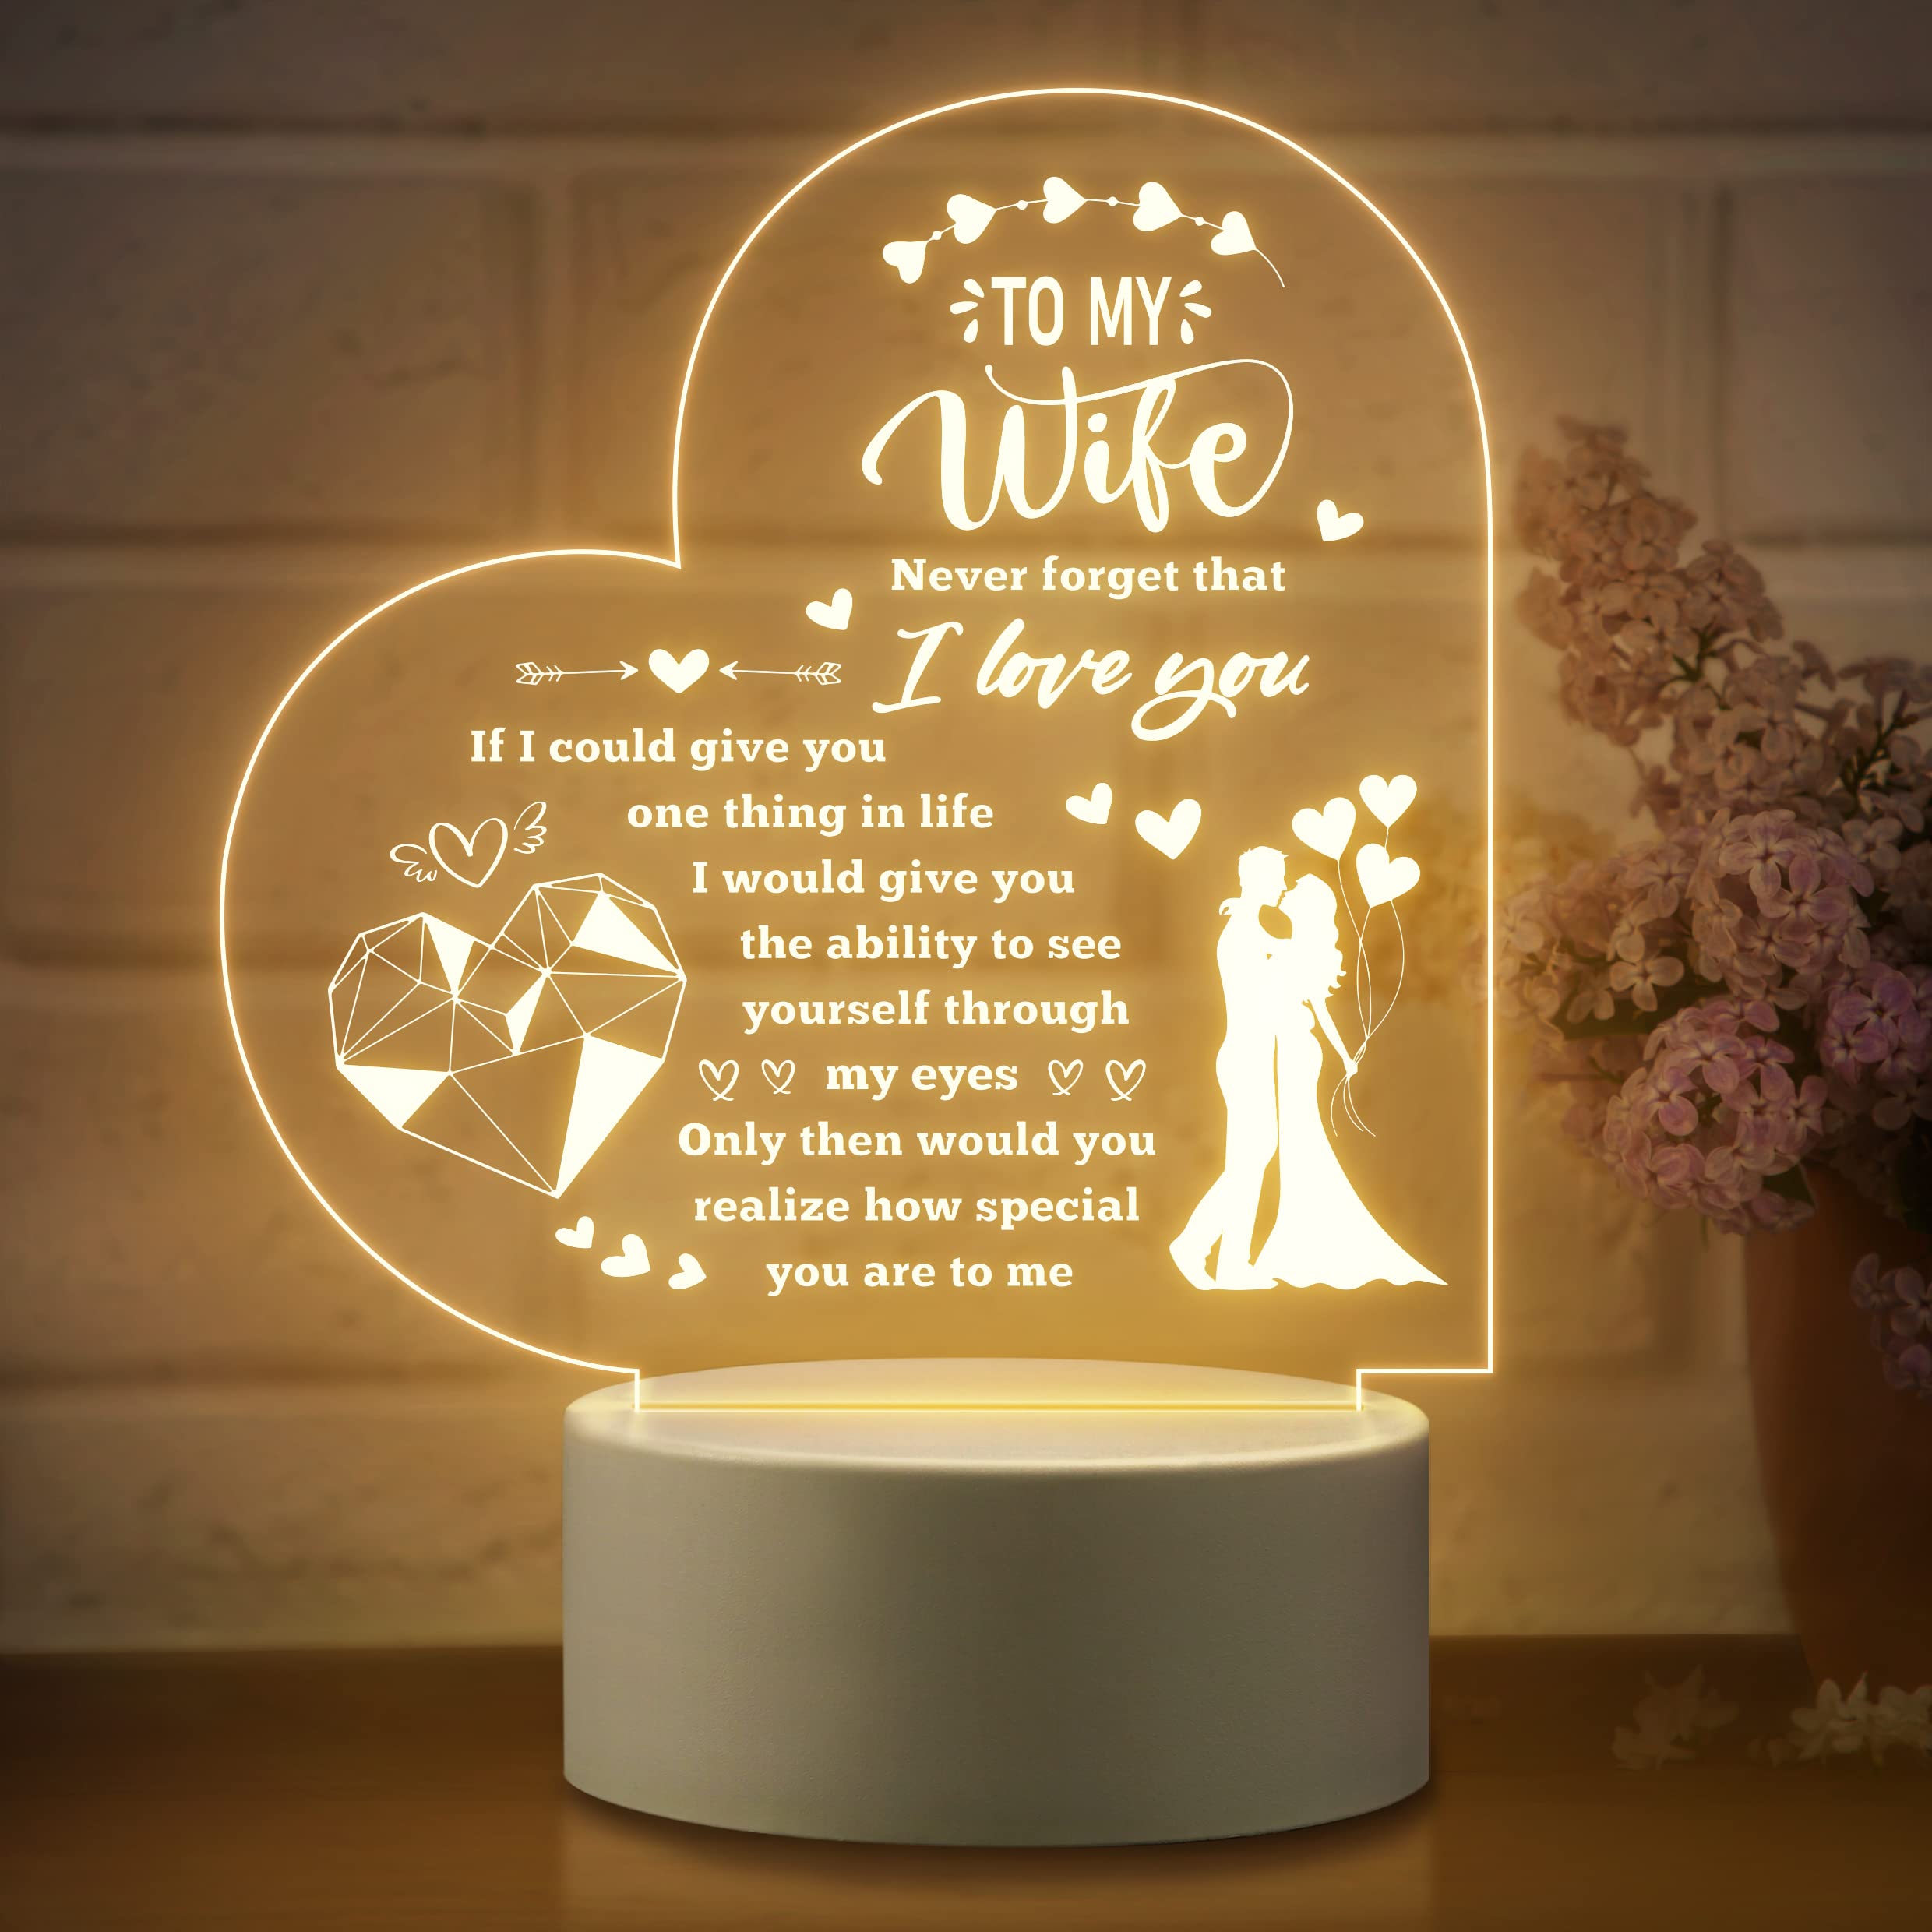 Wife Gifts from Husband, Christmas Gifts for Wife, Funny Birthday Gifts for  Wife, Wife Birthday Gift Ideas, Anniversary Romantic Gift for Wife